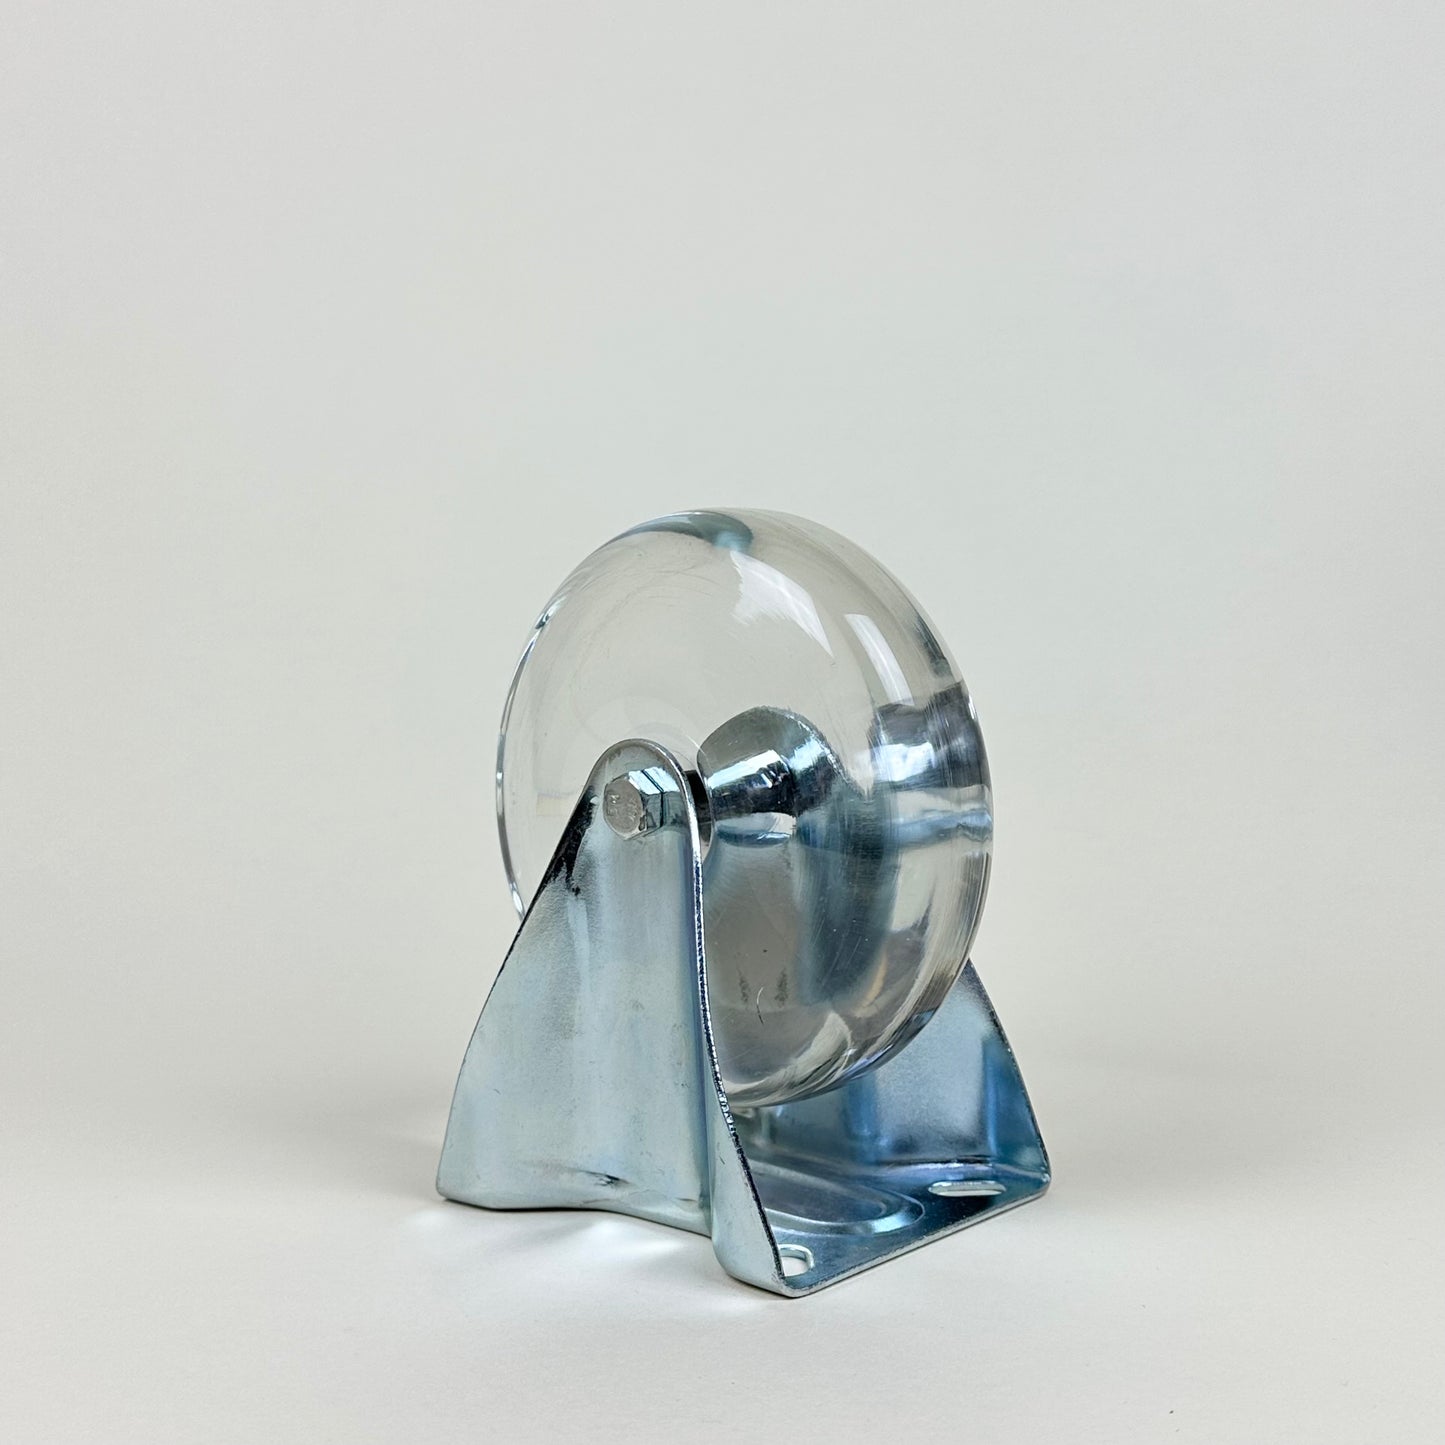 "Support System", glass and metal sculpture by Isa Andersson